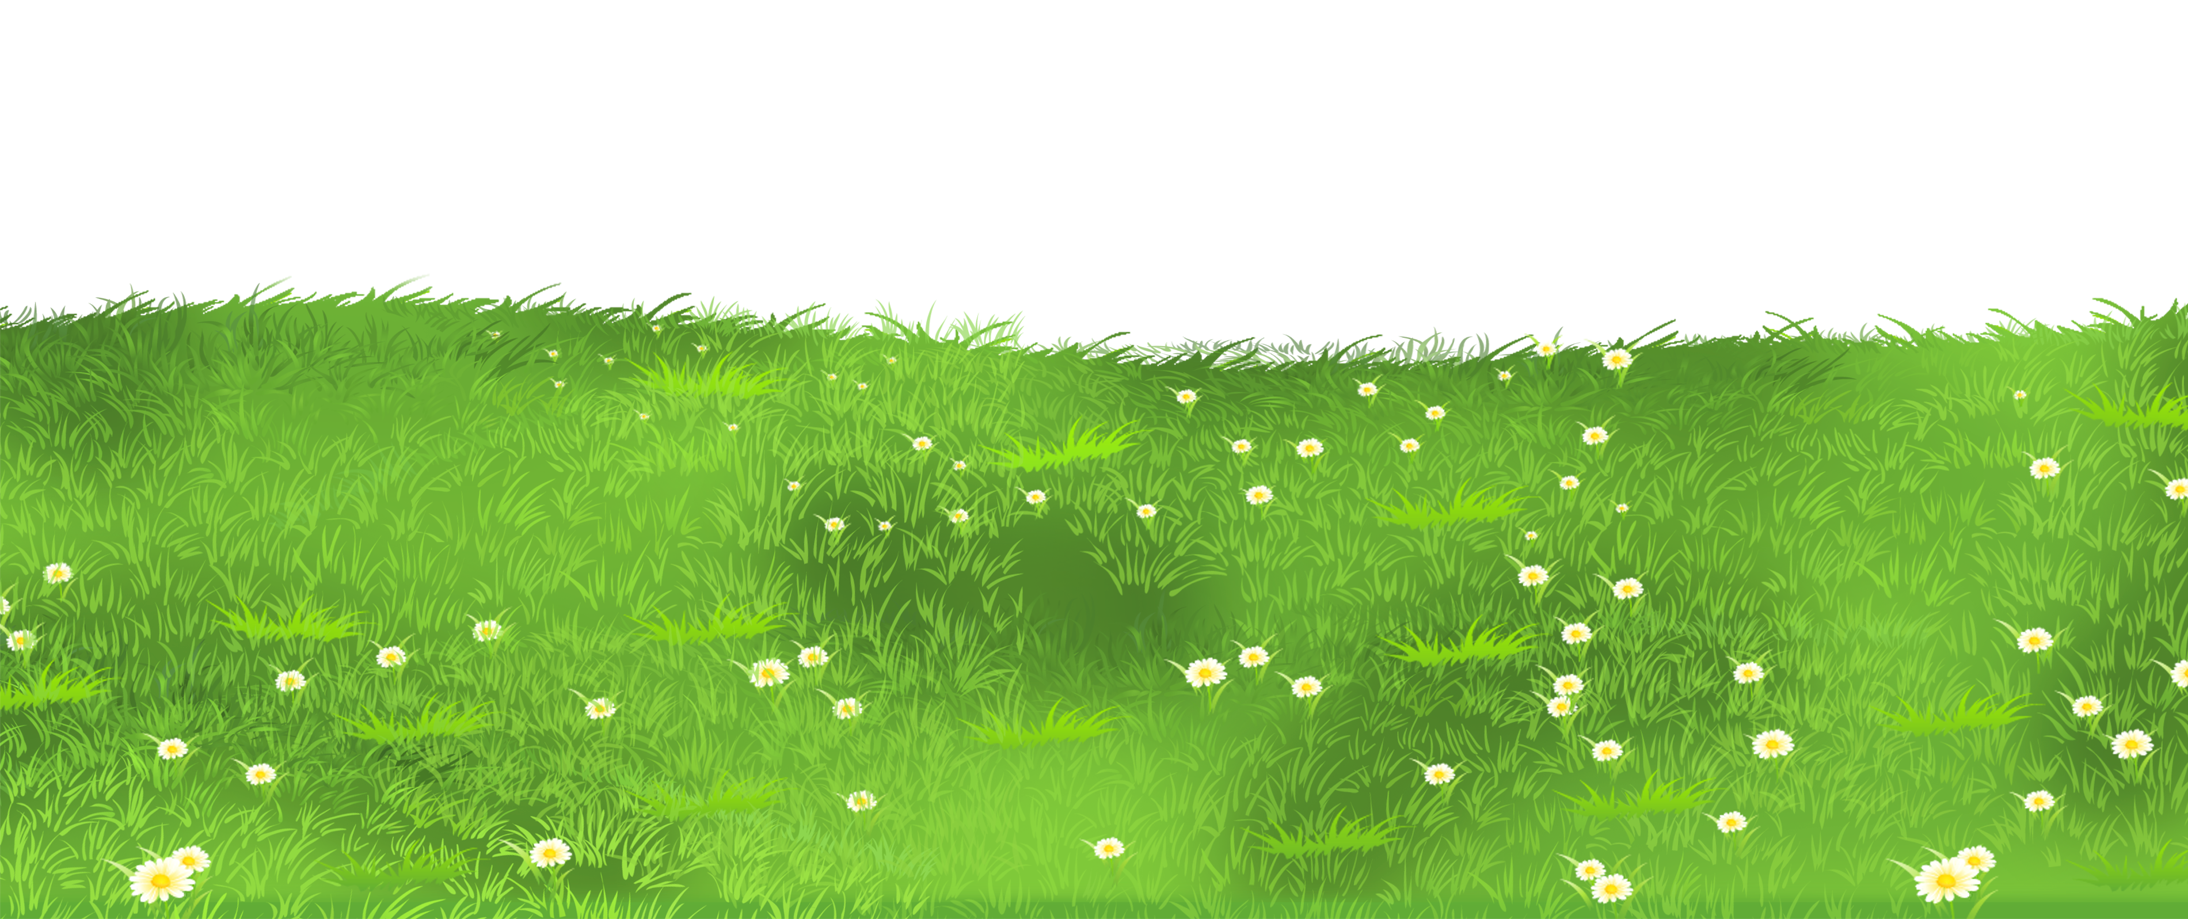 Grass ground with daisies clipart 0